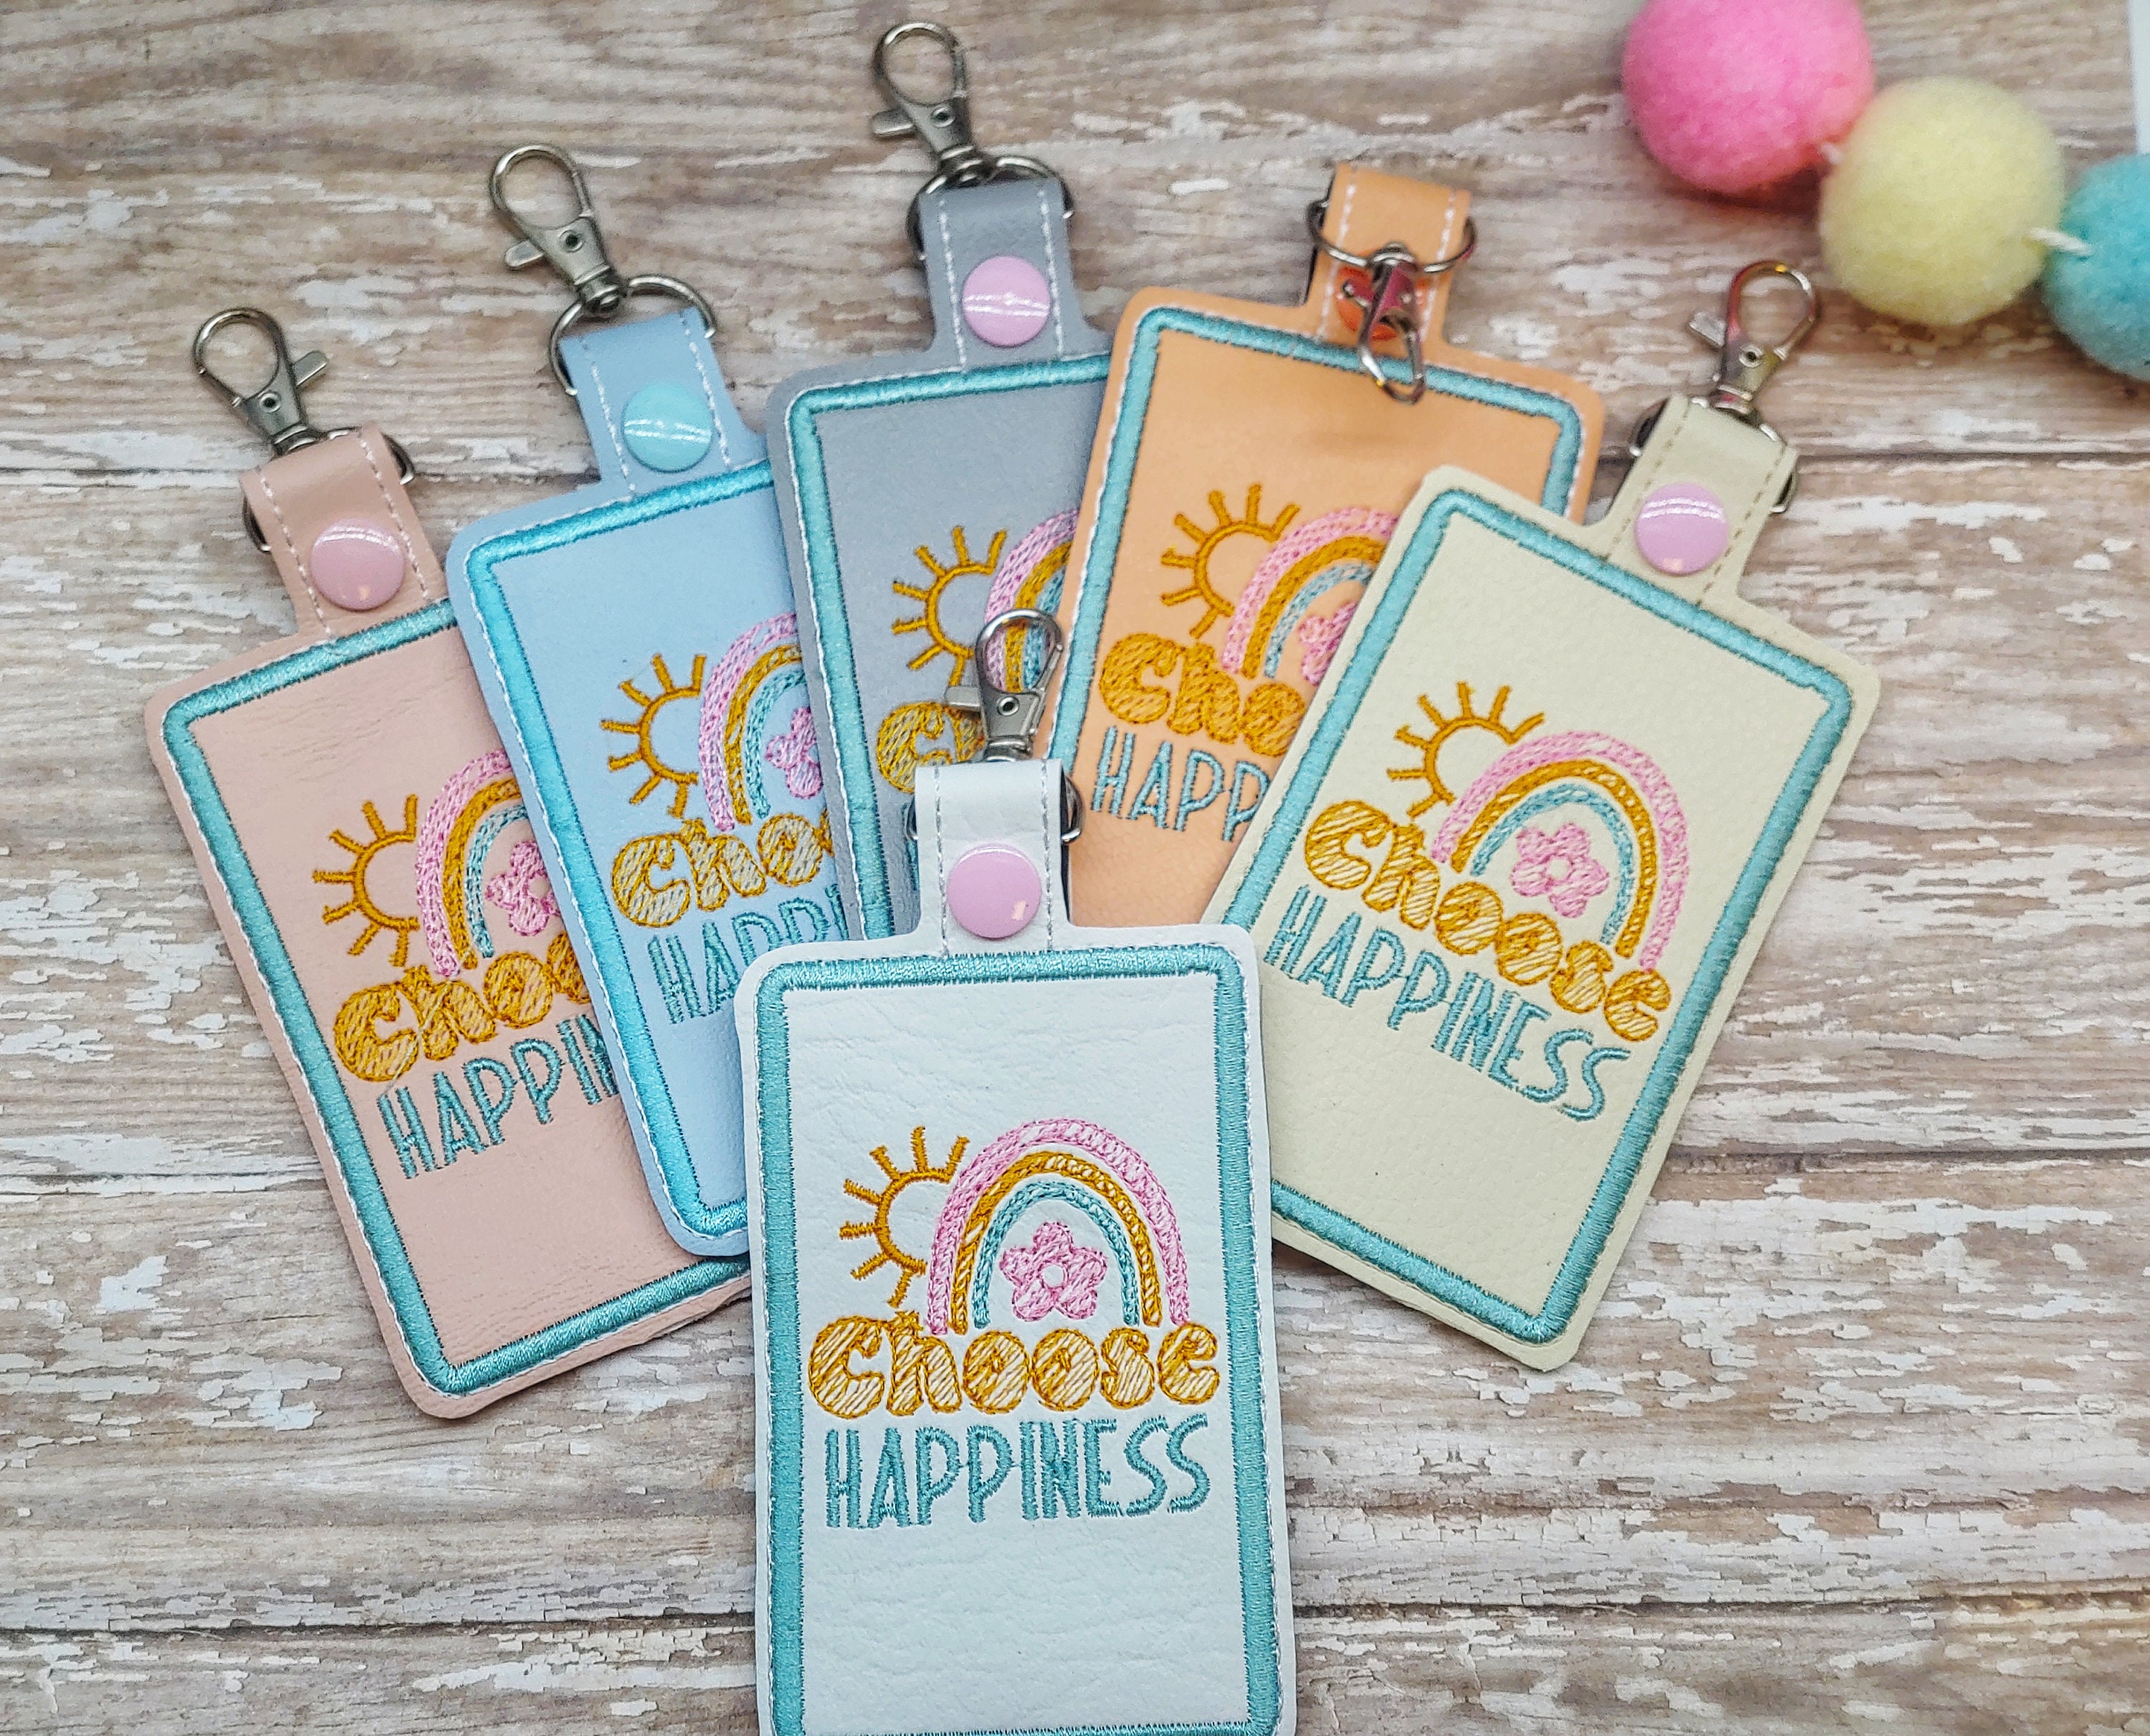 Cute Funny Iron on Patches Happiness, Love, Friendship, Friends,  Embroidered Sew on / Iron on Jeans Bags Clothes Transfer, Badge 